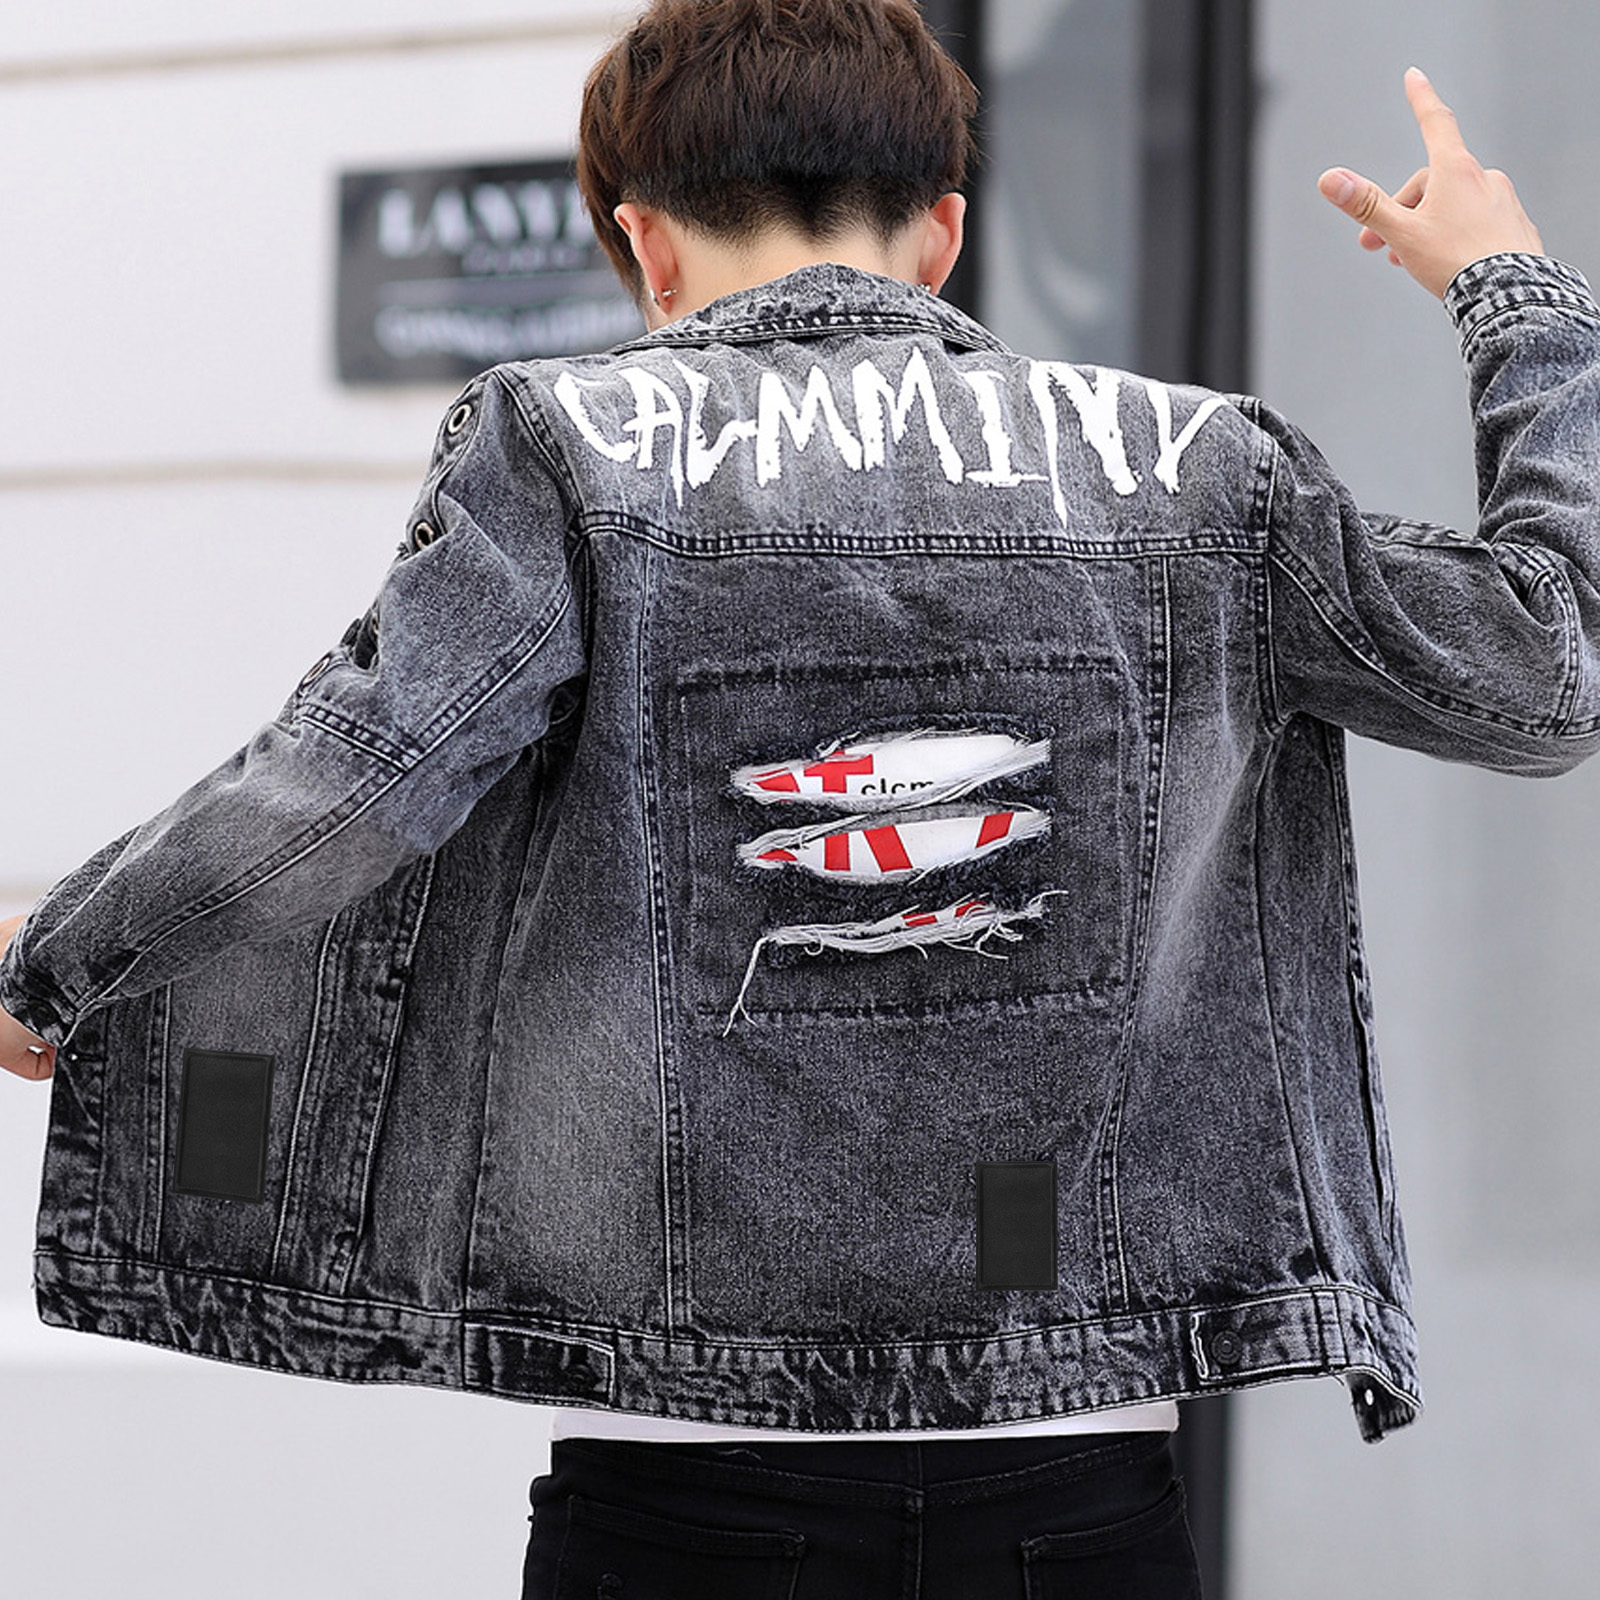 20PCS Iron on Patches for Jeans, TACYKIBD Iron on Denim Patches for  Jackets, 5 Colors Iron Patches, Inside and Outside Iron On Patches for  Jackets Hat